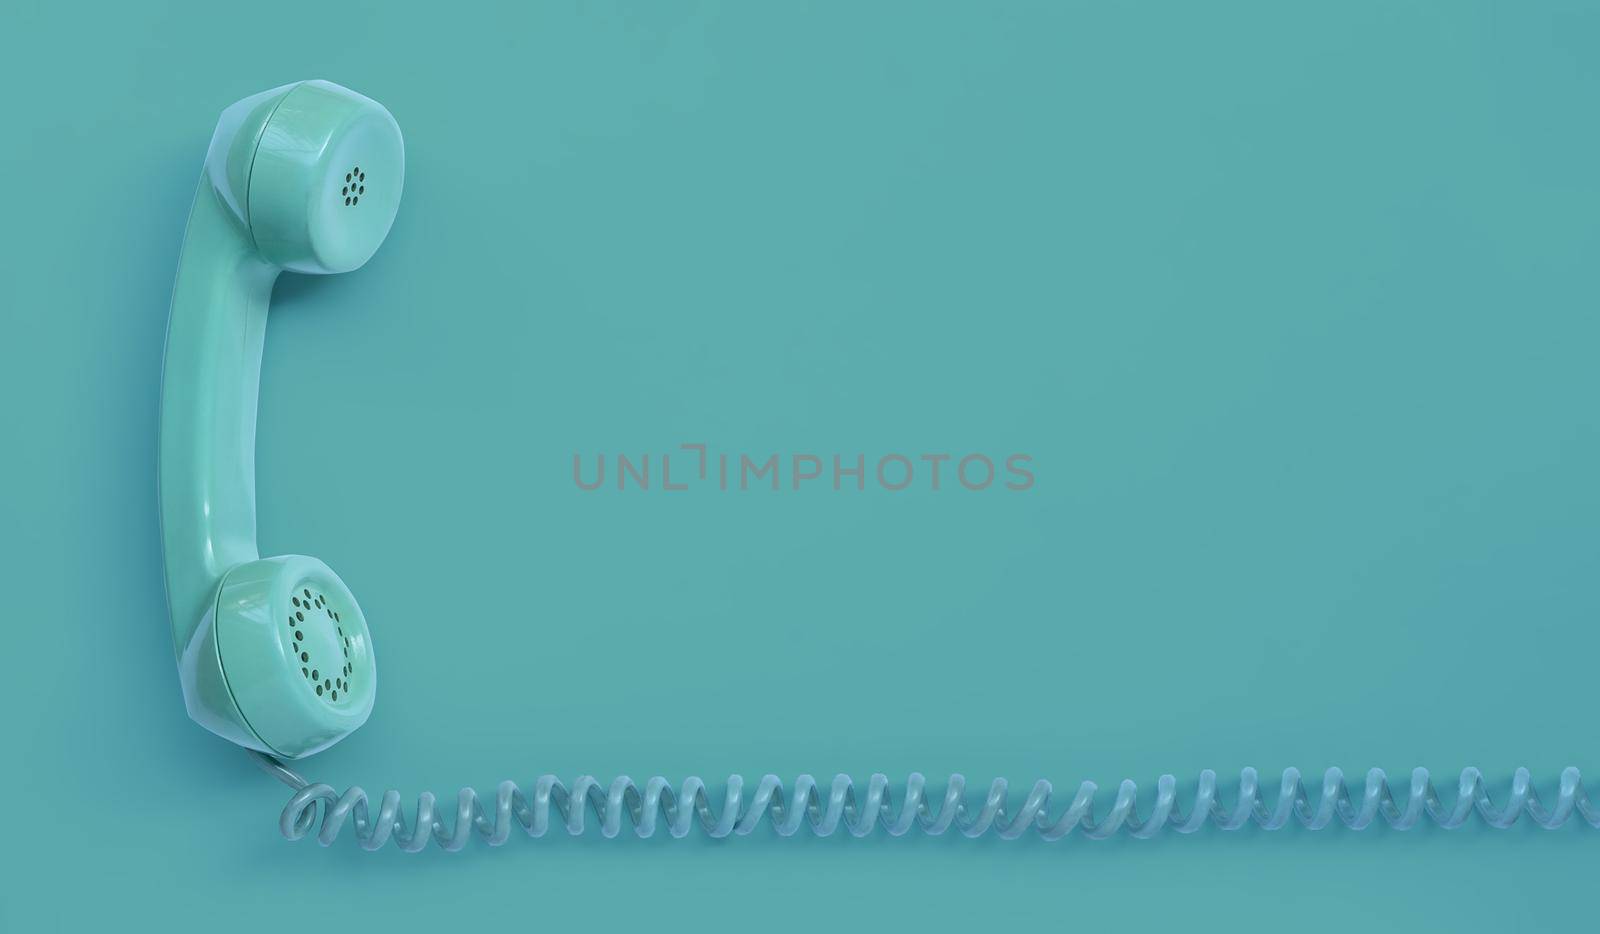 A blue-green vintage dial telephone handset with blue background.